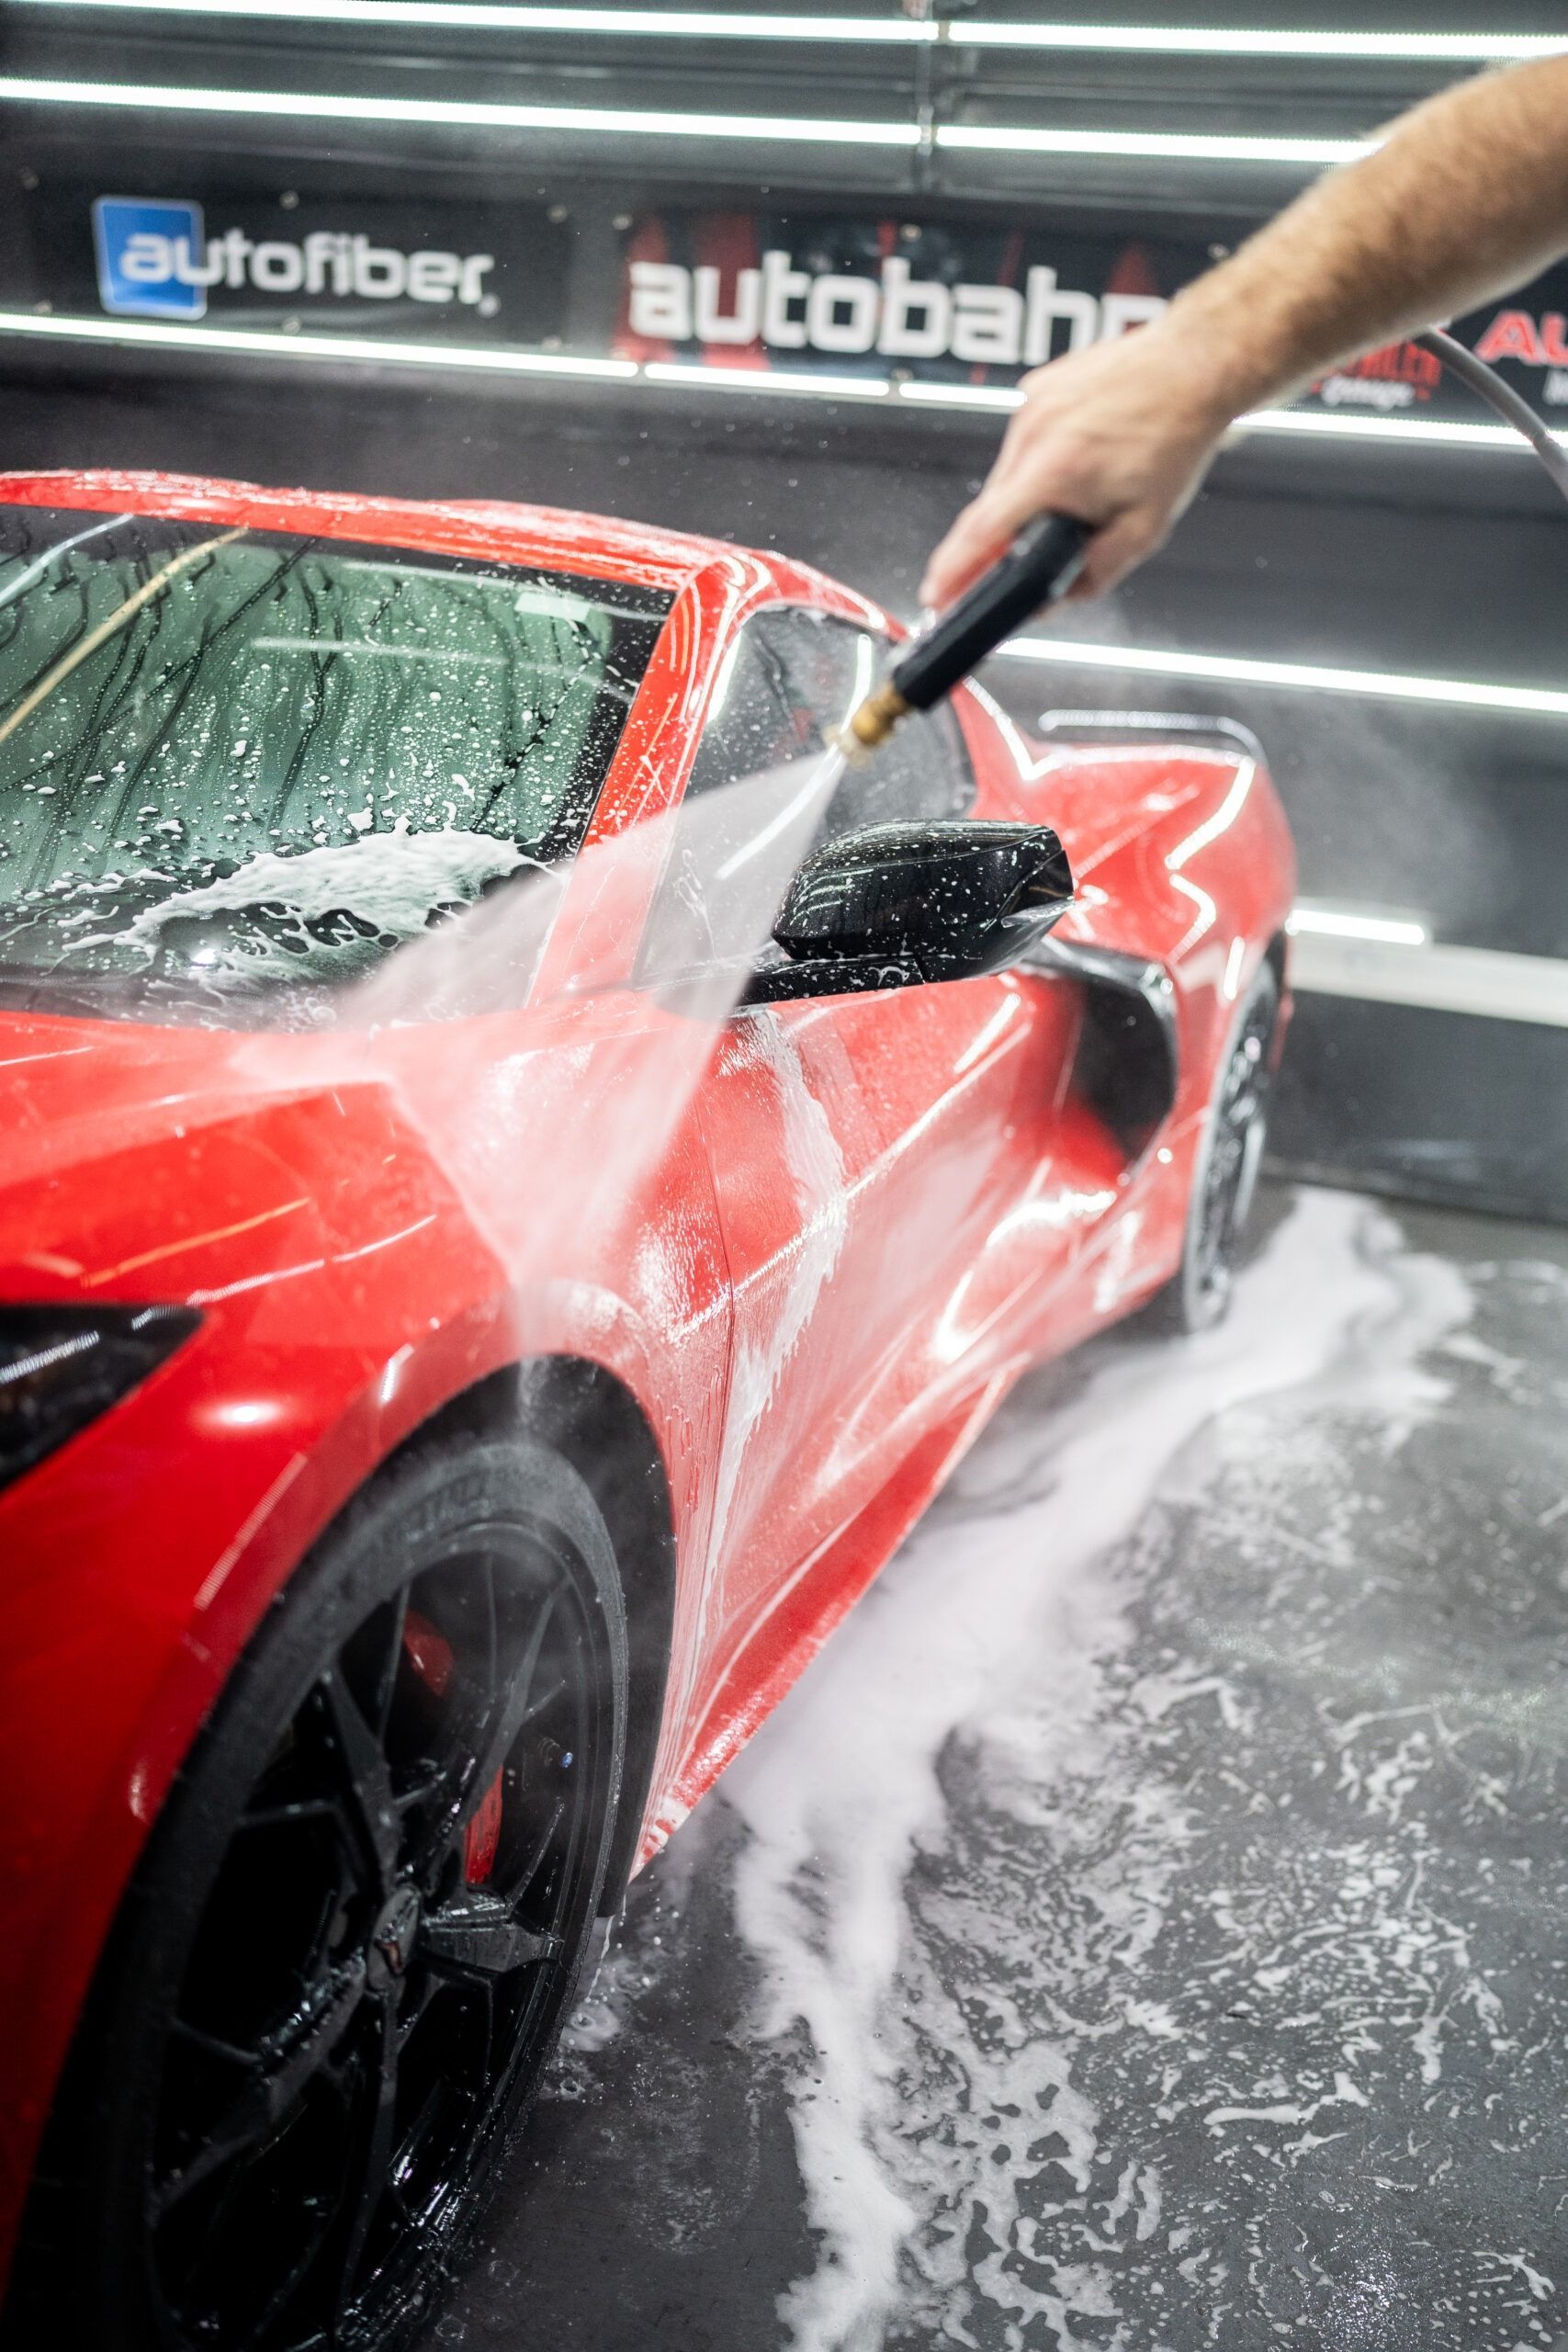 A person is washing a red sports car with a high pressure washer.